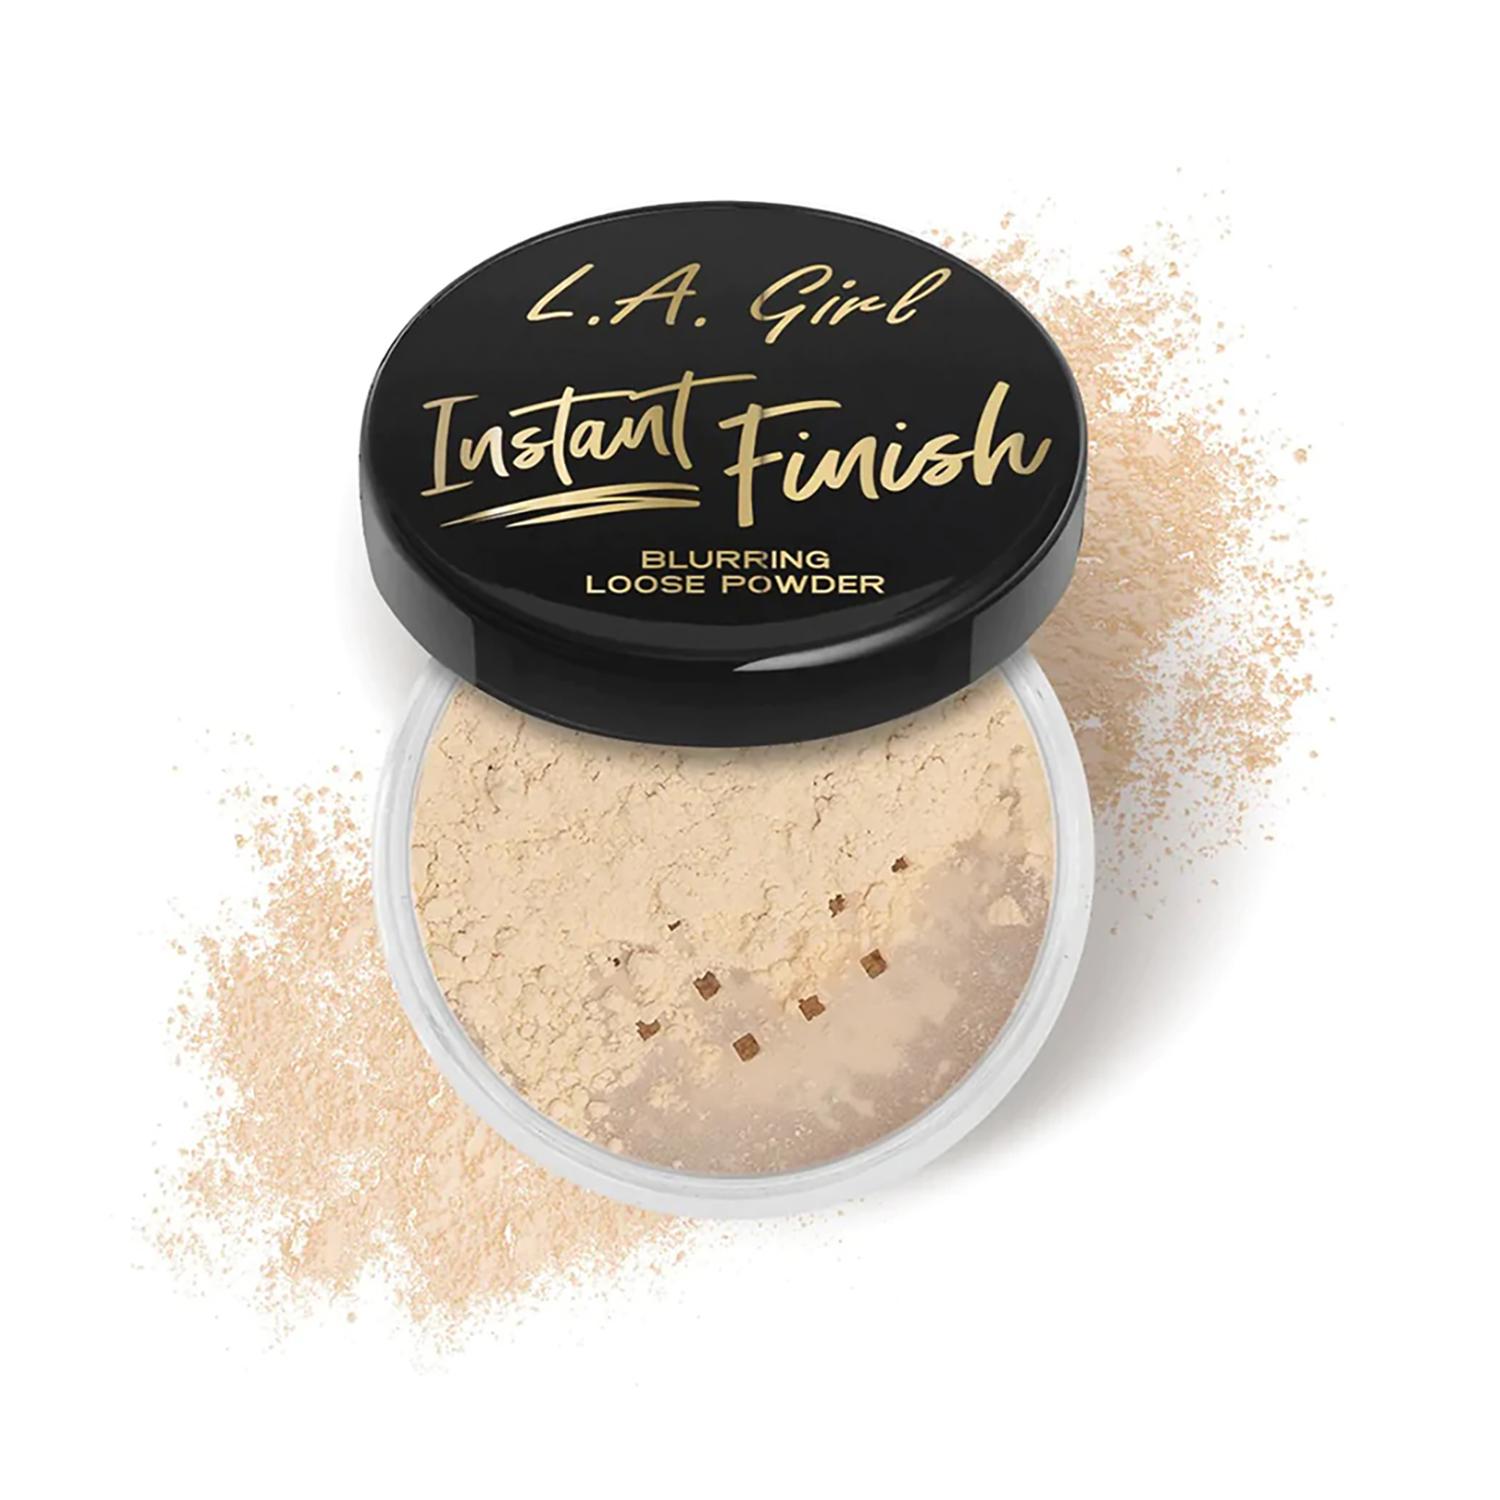 L.A. Girl | L.A. Girl Instant Finish Blurring Loose Powder Boxed - Light (6g)